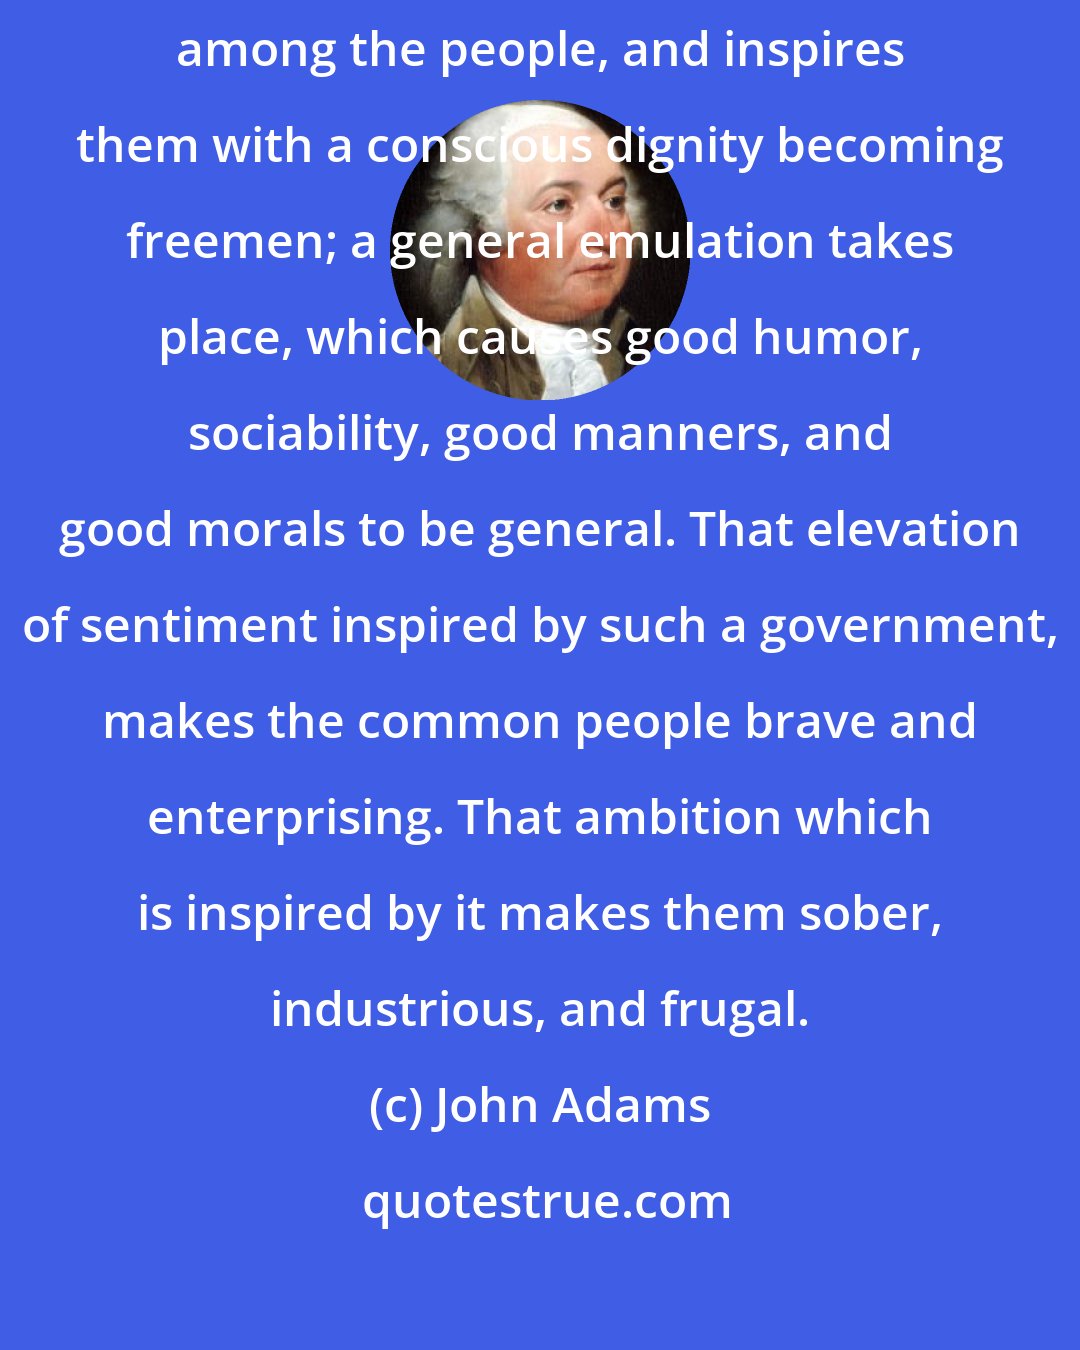 John Adams: A constitution founded on these principles introduces knowledge among the people, and inspires them with a conscious dignity becoming freemen; a general emulation takes place, which causes good humor, sociability, good manners, and good morals to be general. That elevation of sentiment inspired by such a government, makes the common people brave and enterprising. That ambition which is inspired by it makes them sober, industrious, and frugal.